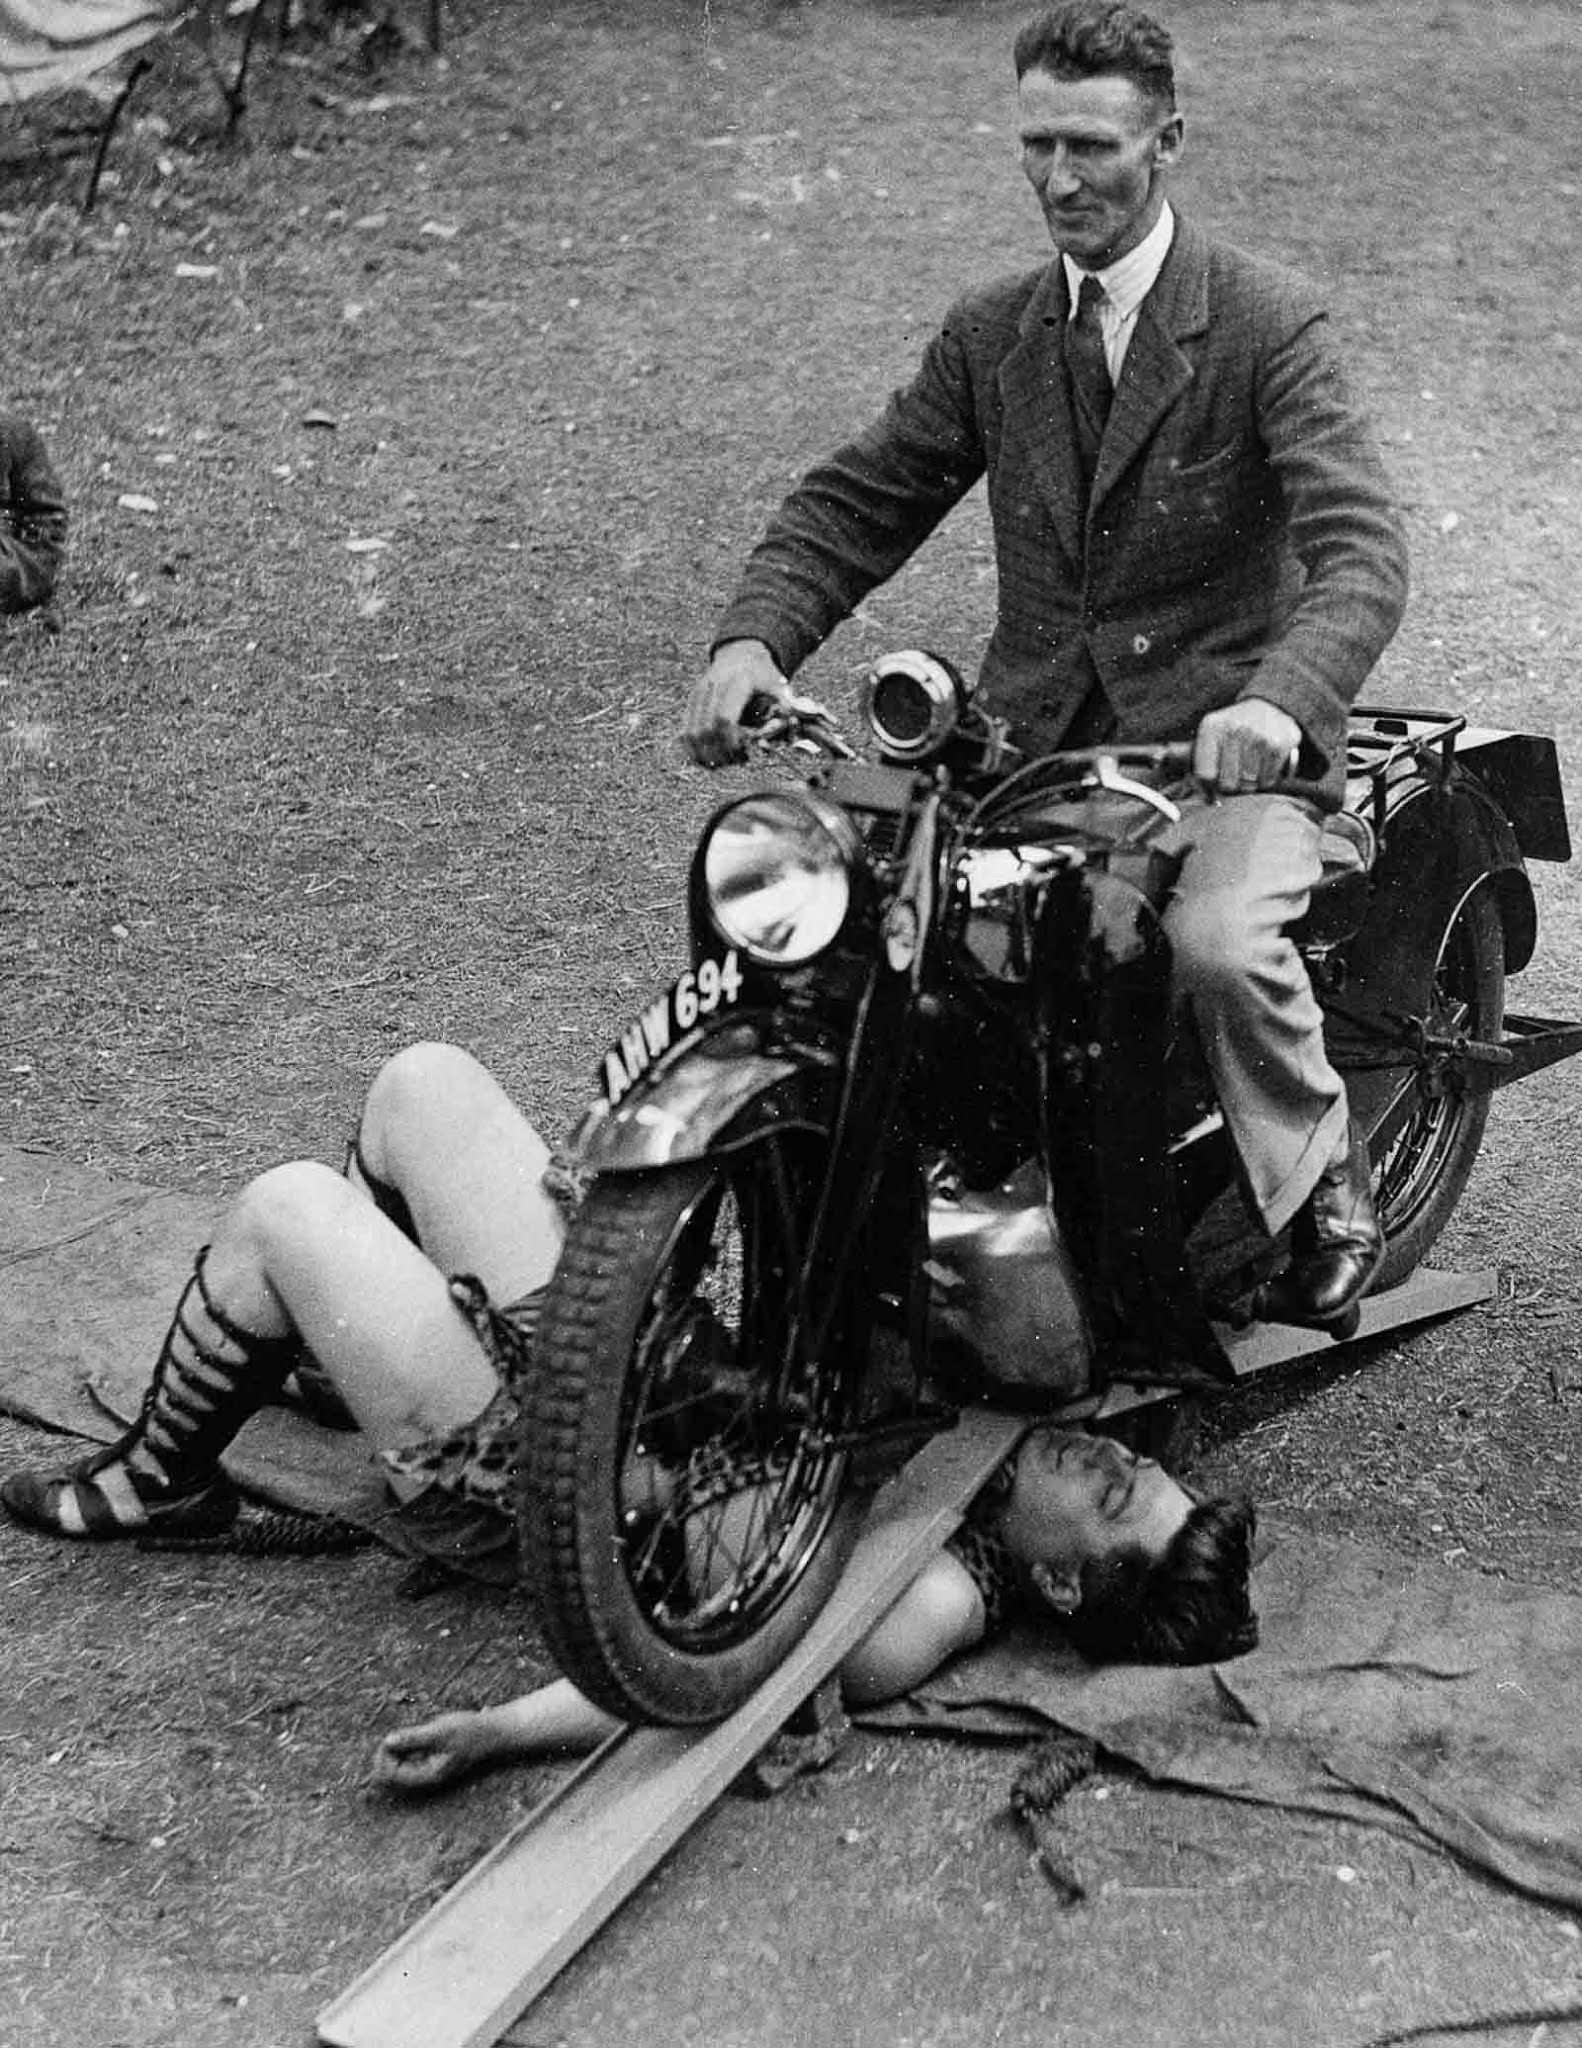 Samson Brown, “the world’s strongest man,” lets a motorcycle run over him, 1934.